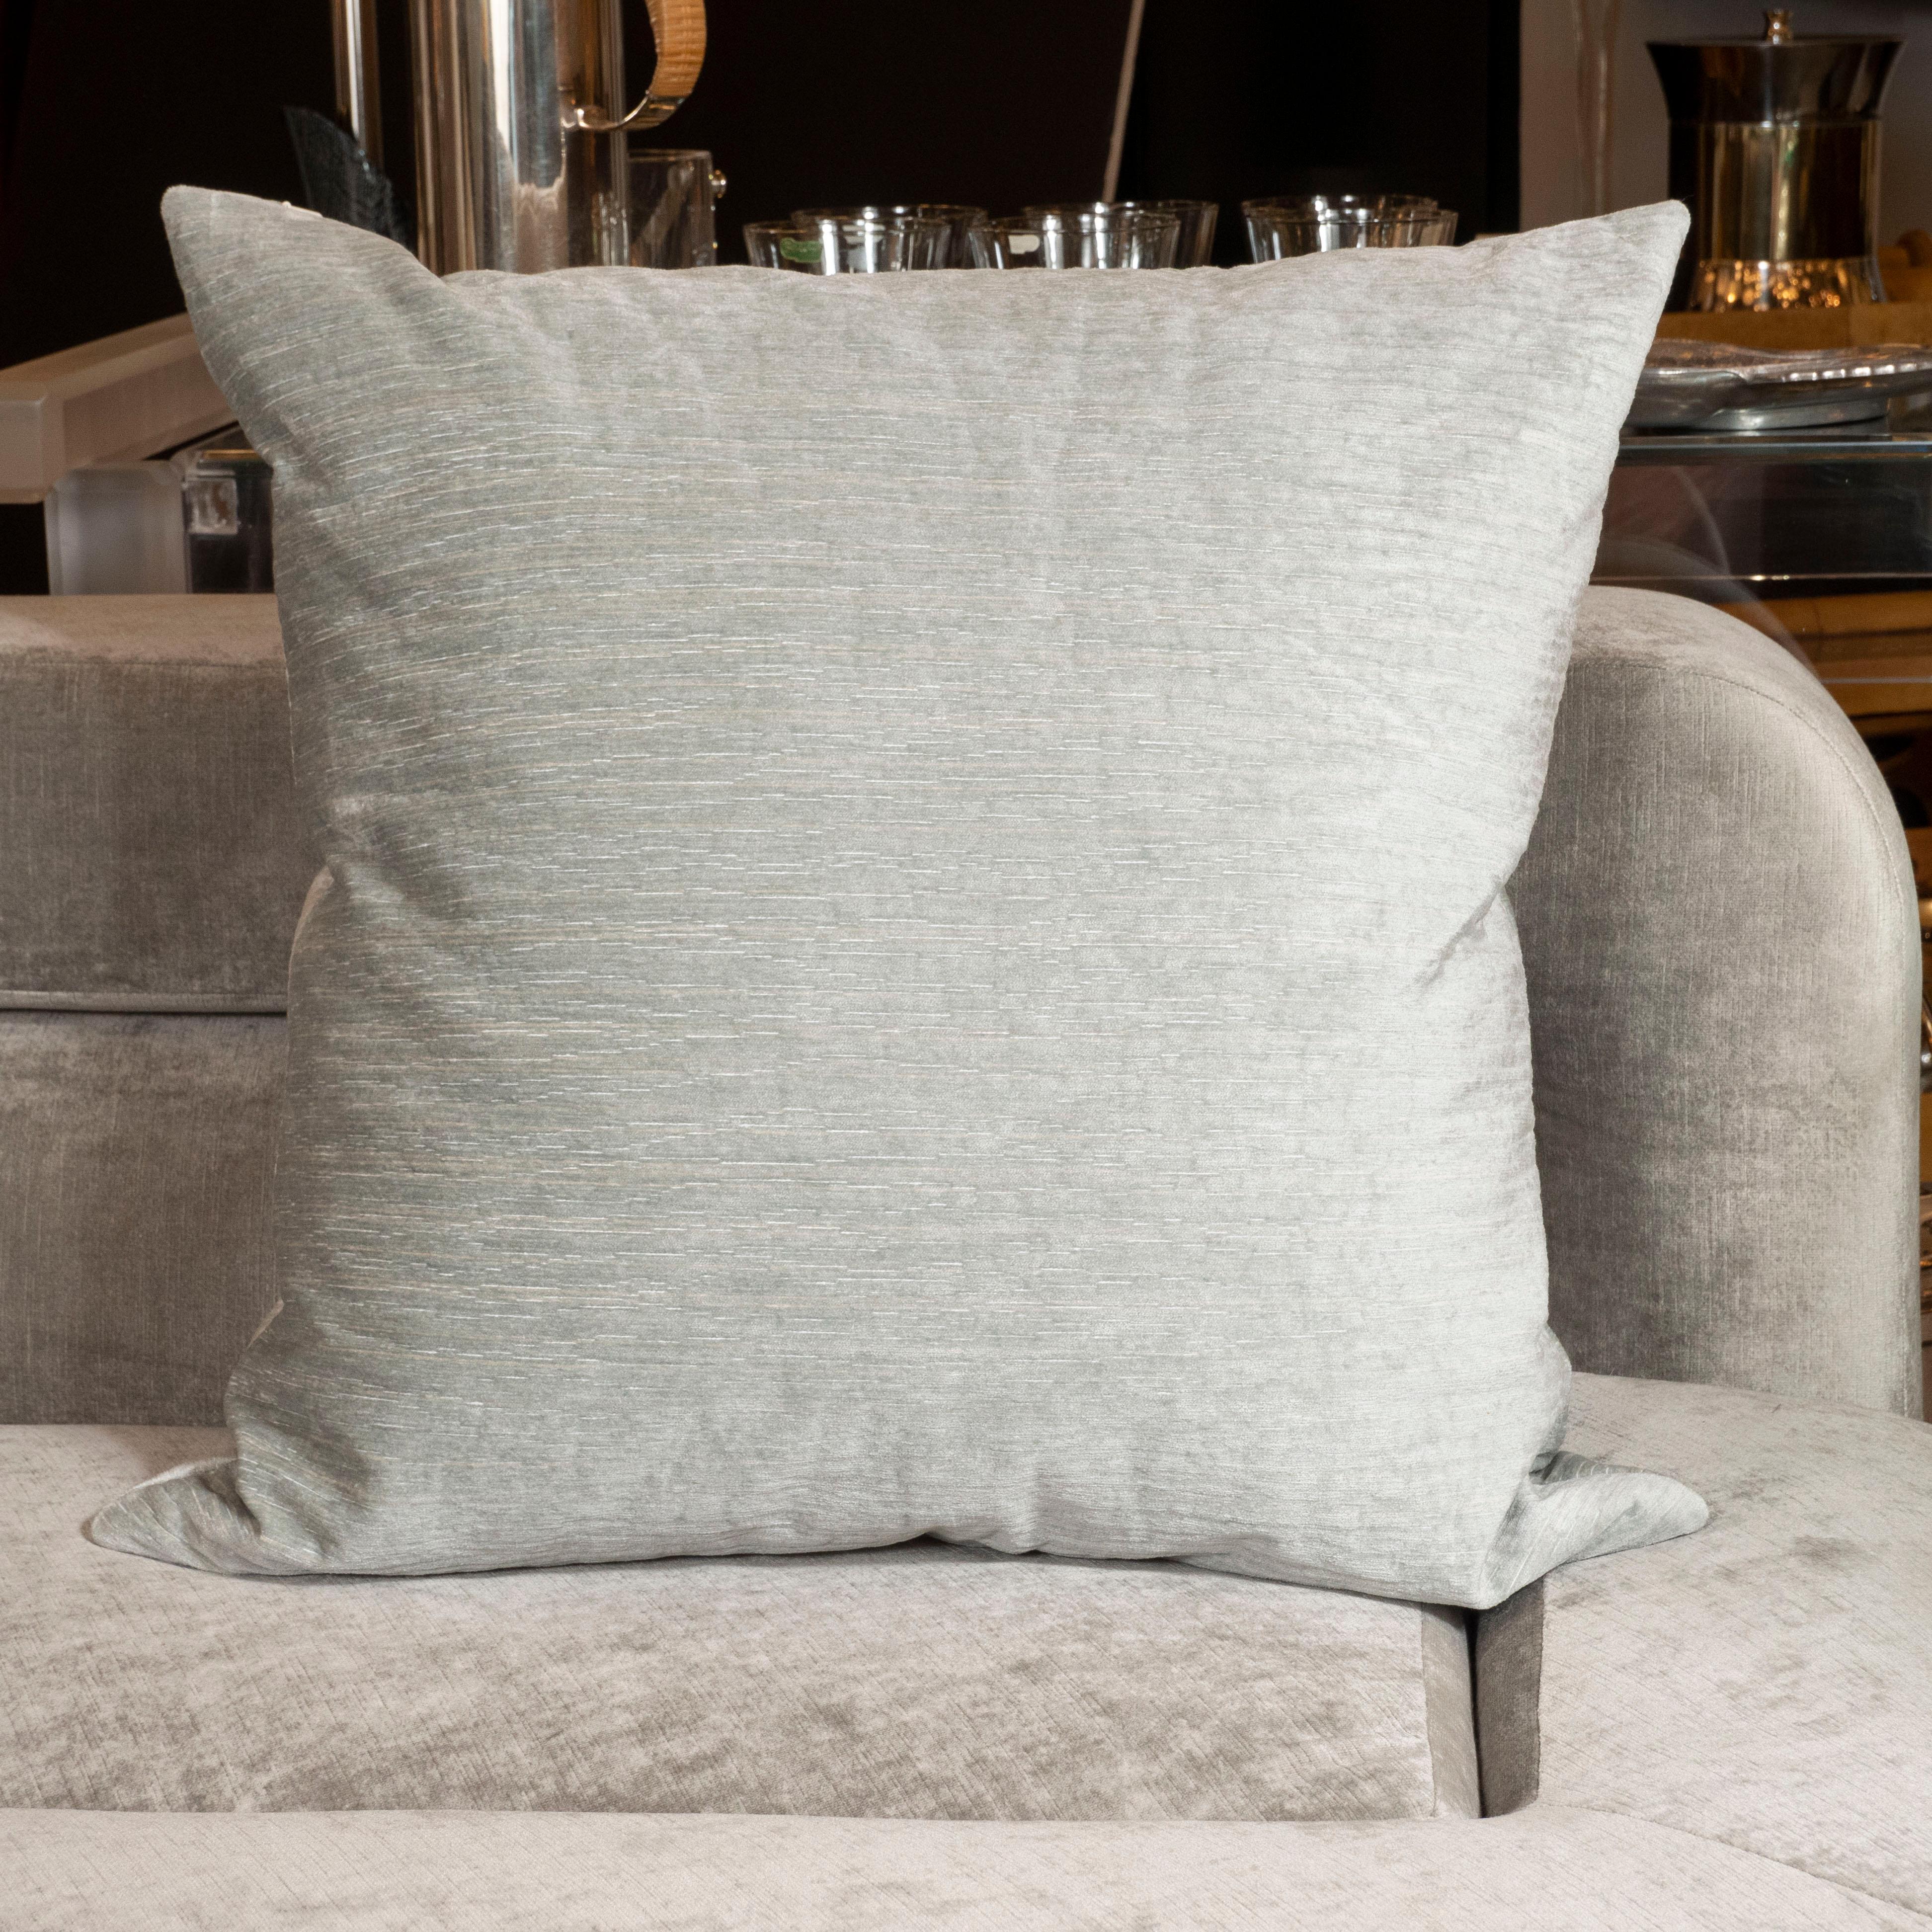 This gorgeous pair of modernist pillows were realized in the United States during the 21st century. They feature square bodies that covered in a soft striated sea foam velvet. With their refined palate and austere organic texture, they would be a